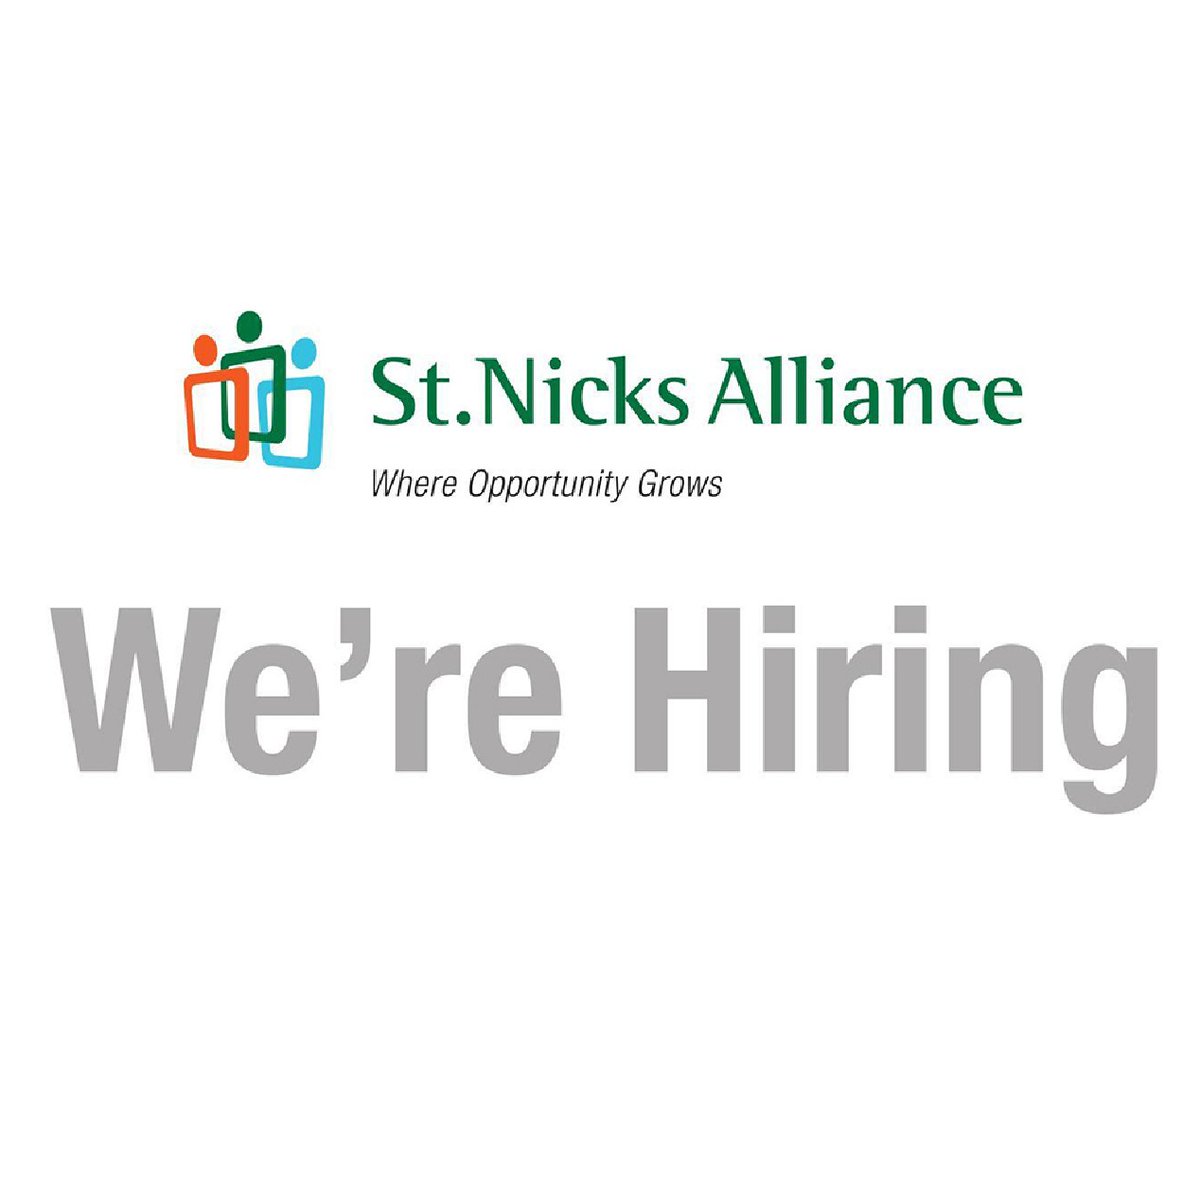 We are #hiring a full-time Social Services Case Manager! Qualifications: ✅Bi-lingual (English and Spanish) ✅Experience with community outreach or social services Salary: $45,000, commensurate with experience See full job description: stnicksalliance.org/careers/